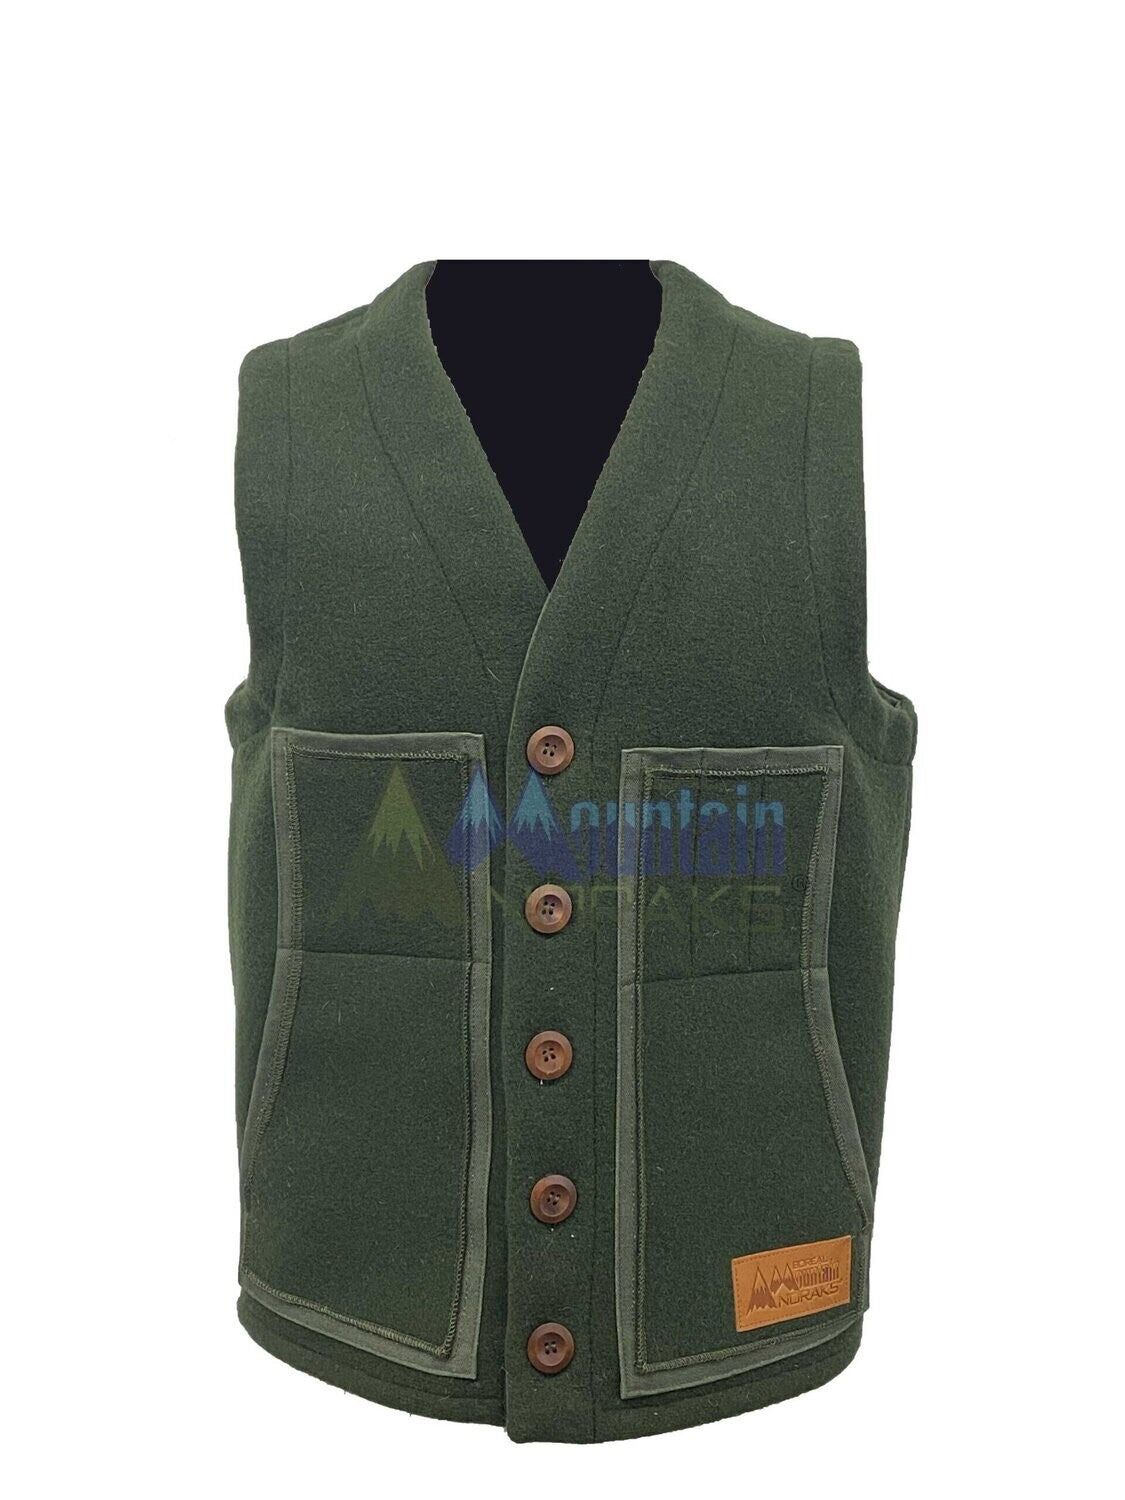 The Loden Green Vest